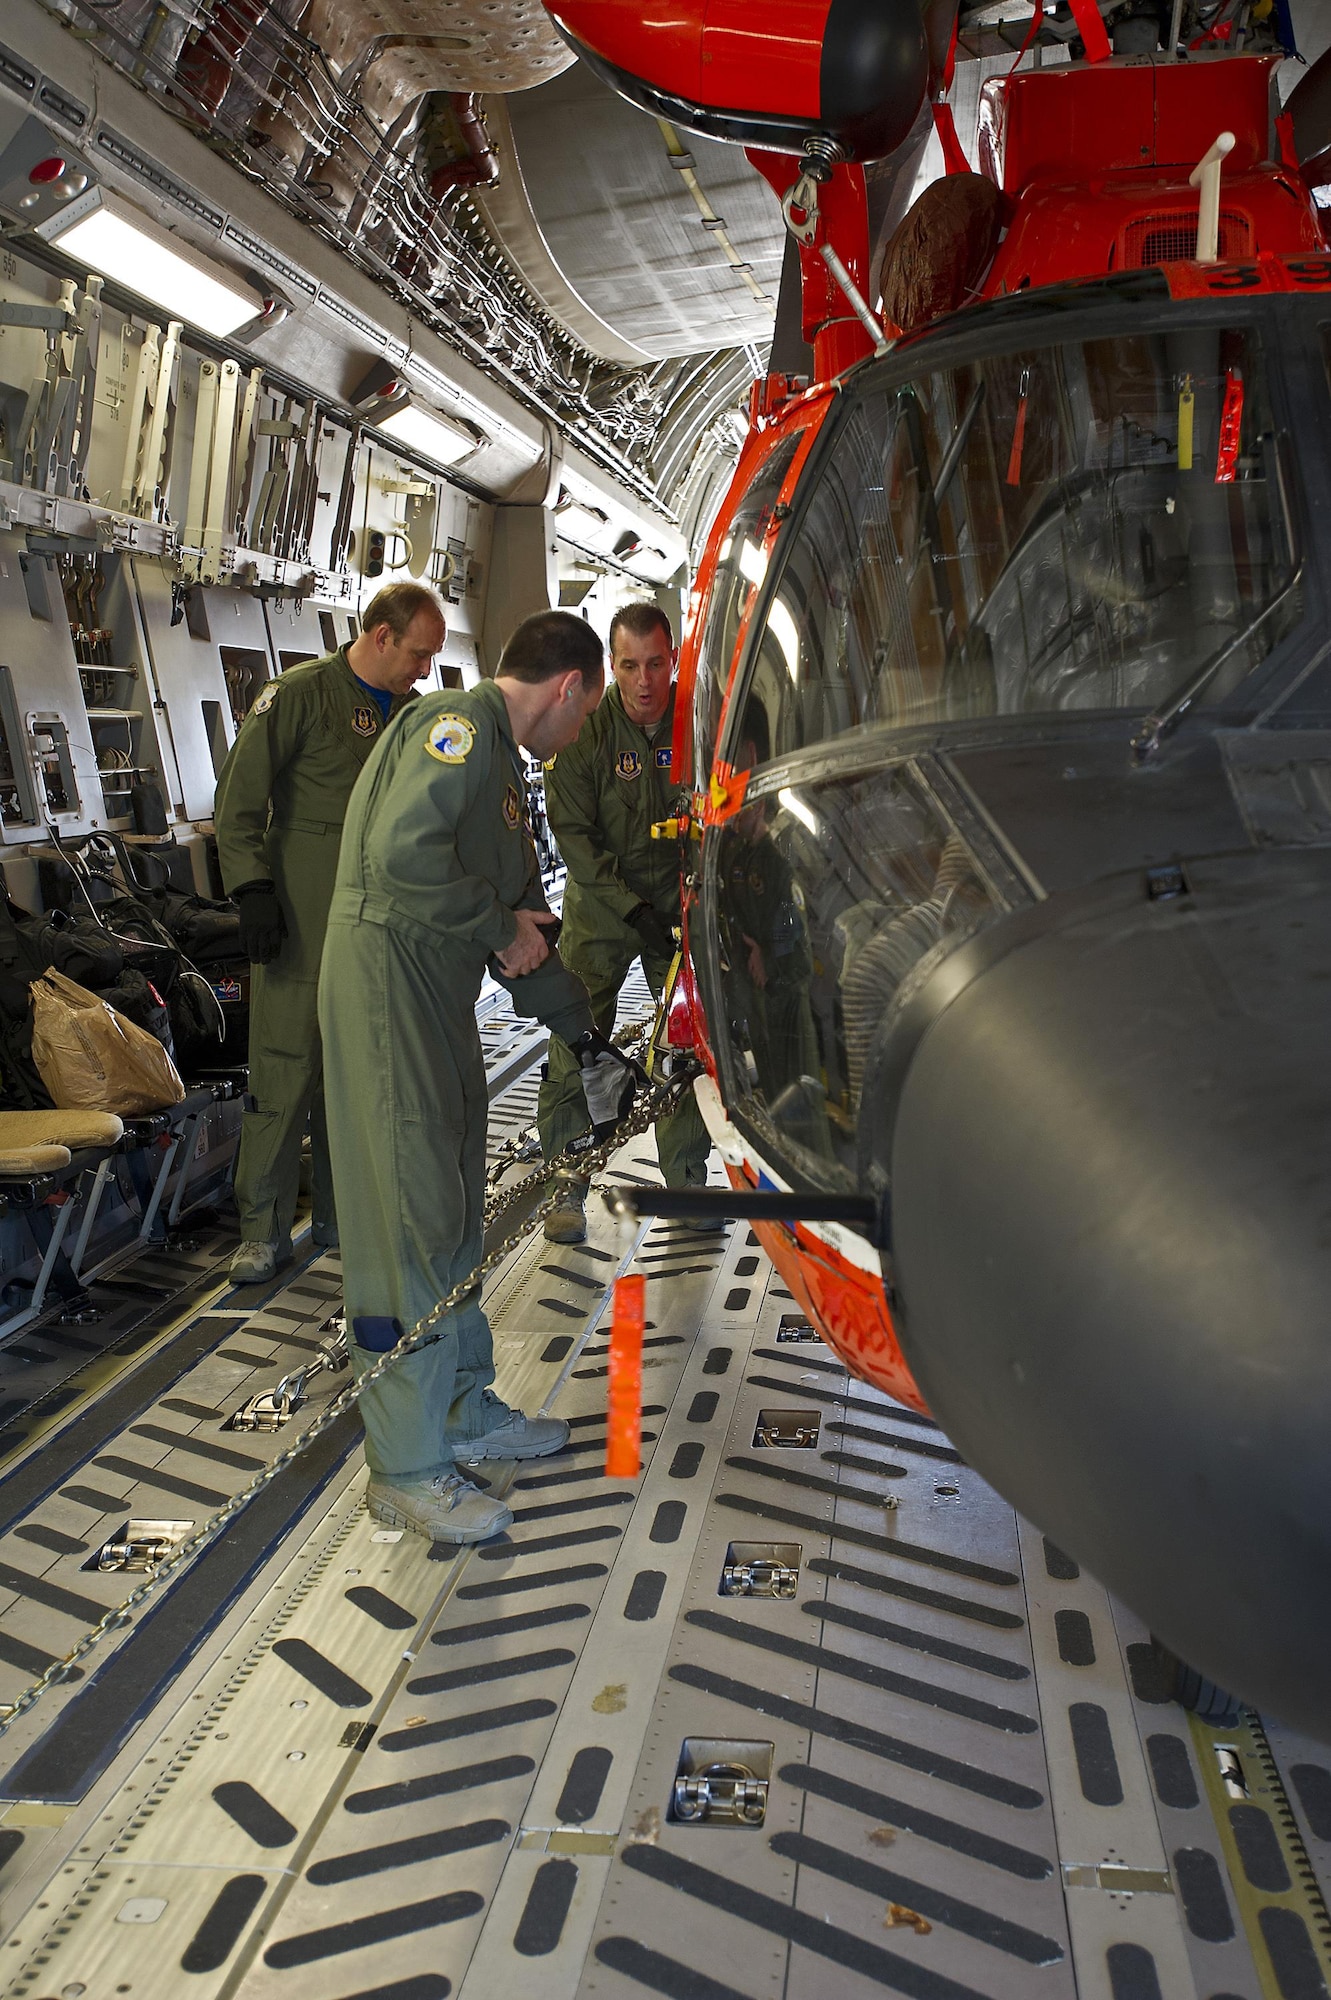 Tech. Sgts. Michael Smith (middle) and Brian Farmintino (rigtht), both loadmasters assigned to the 300th Airlift Squadron, Joint Base Charleston, South Carolina, measure the distance of their tie-down chains secured to the U.S. Coast Guard's MH-65 Dolphin helicopter prior to departure. Reservists assigned to the 300 AS assisted the U.S. Coast Guard with transporting several MH-65 Dolphin helicopters and various supplies Feb. 5-7, 2016. (U.S. Air Force photo by SSgt. Bobby Pilch)